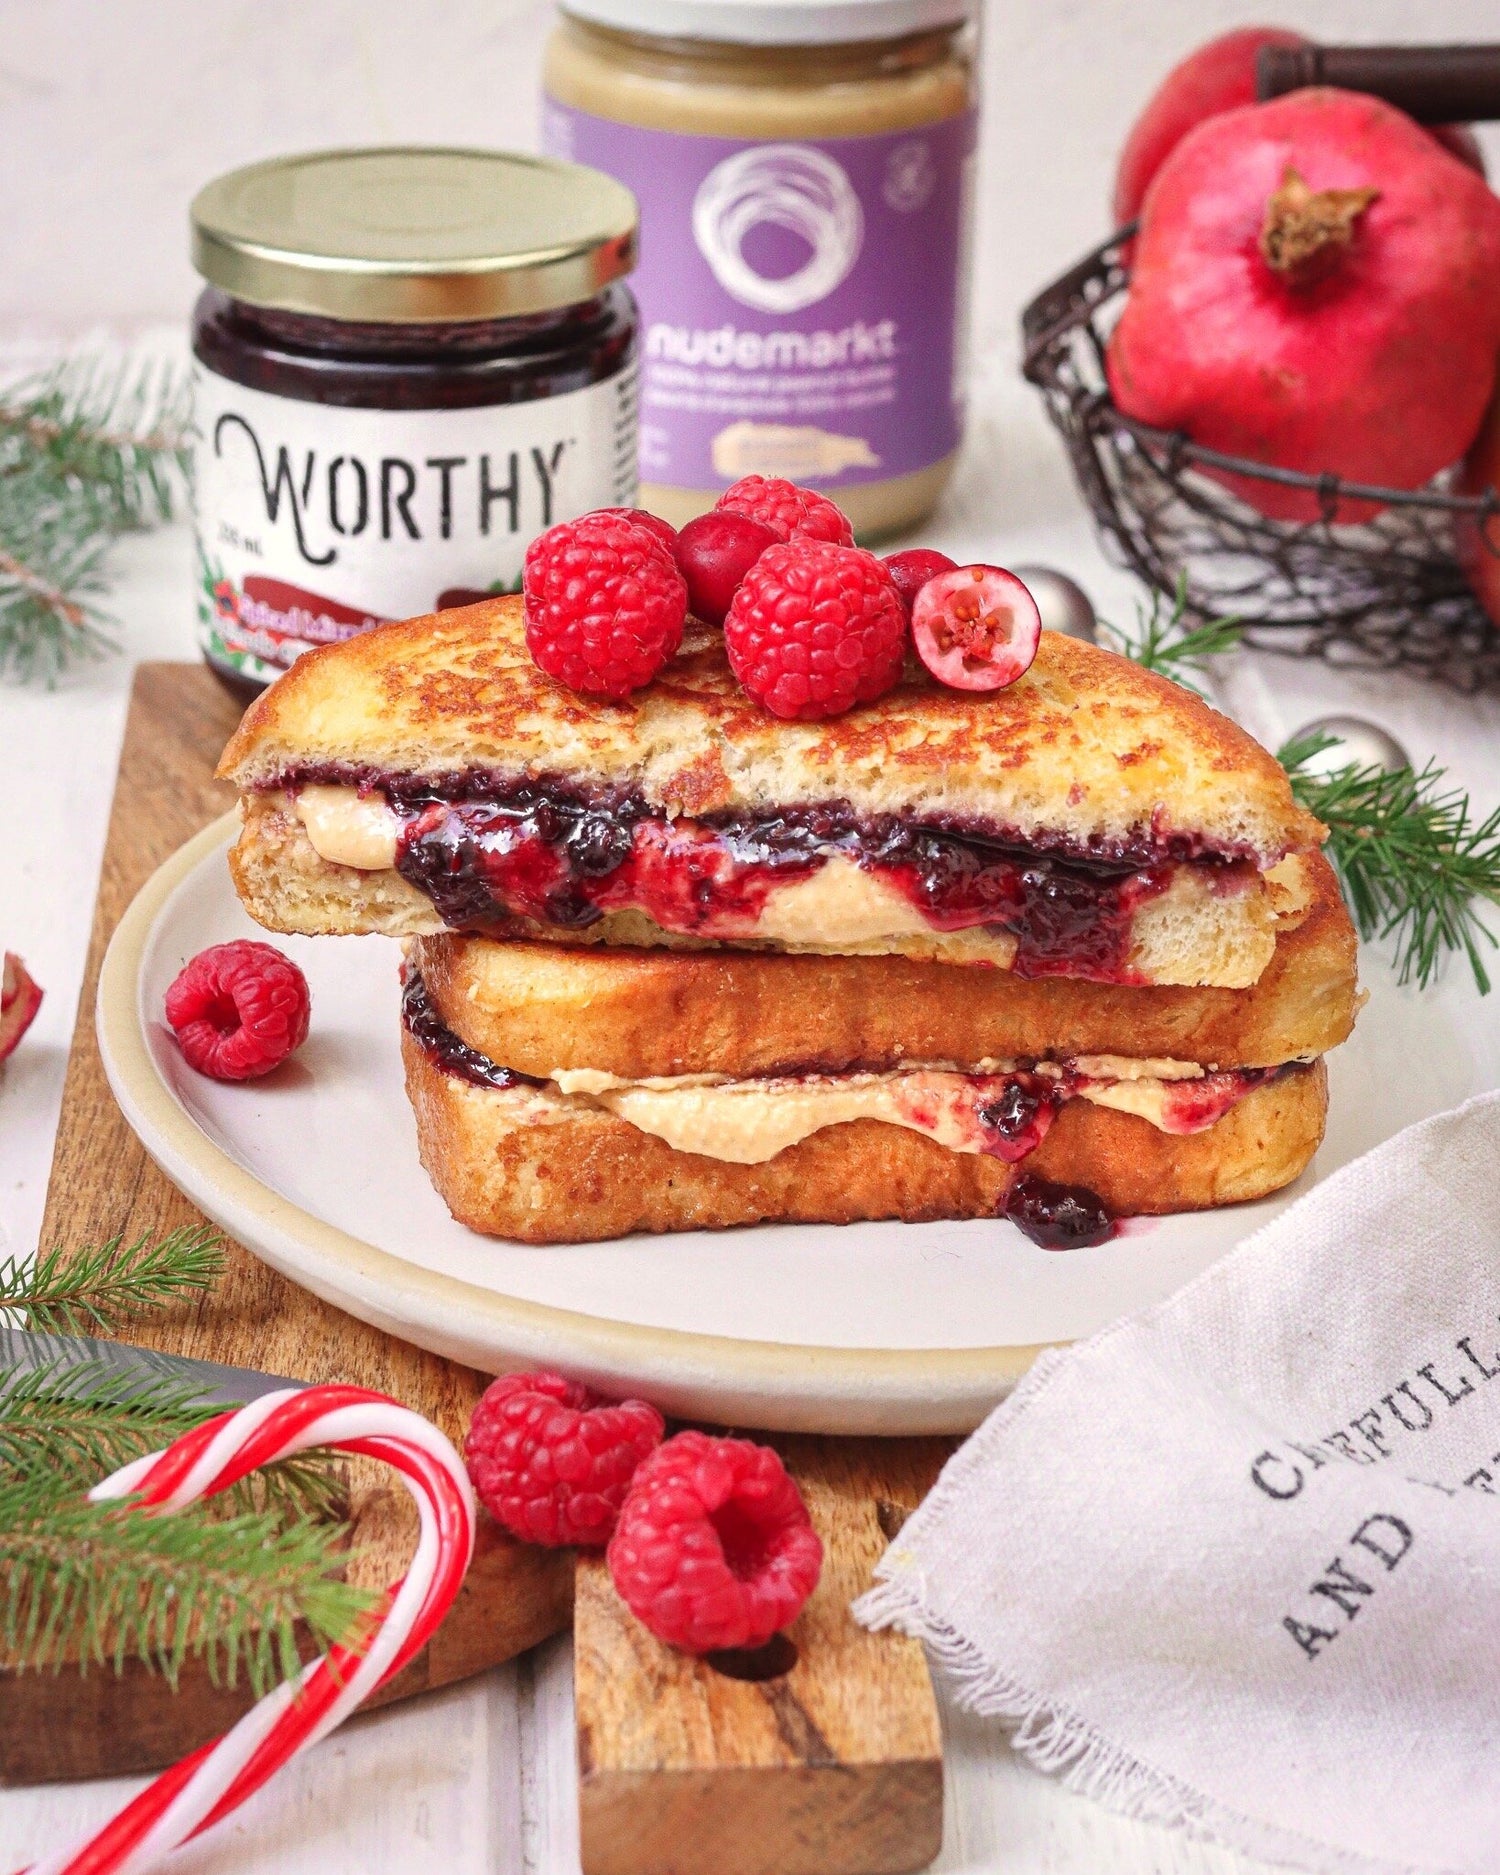 French toast stuffed with Worthy’s Spiced Mixed Berry spread and Nudemarket’s Peanut Butter topped with raspberries in a Christmas setting.